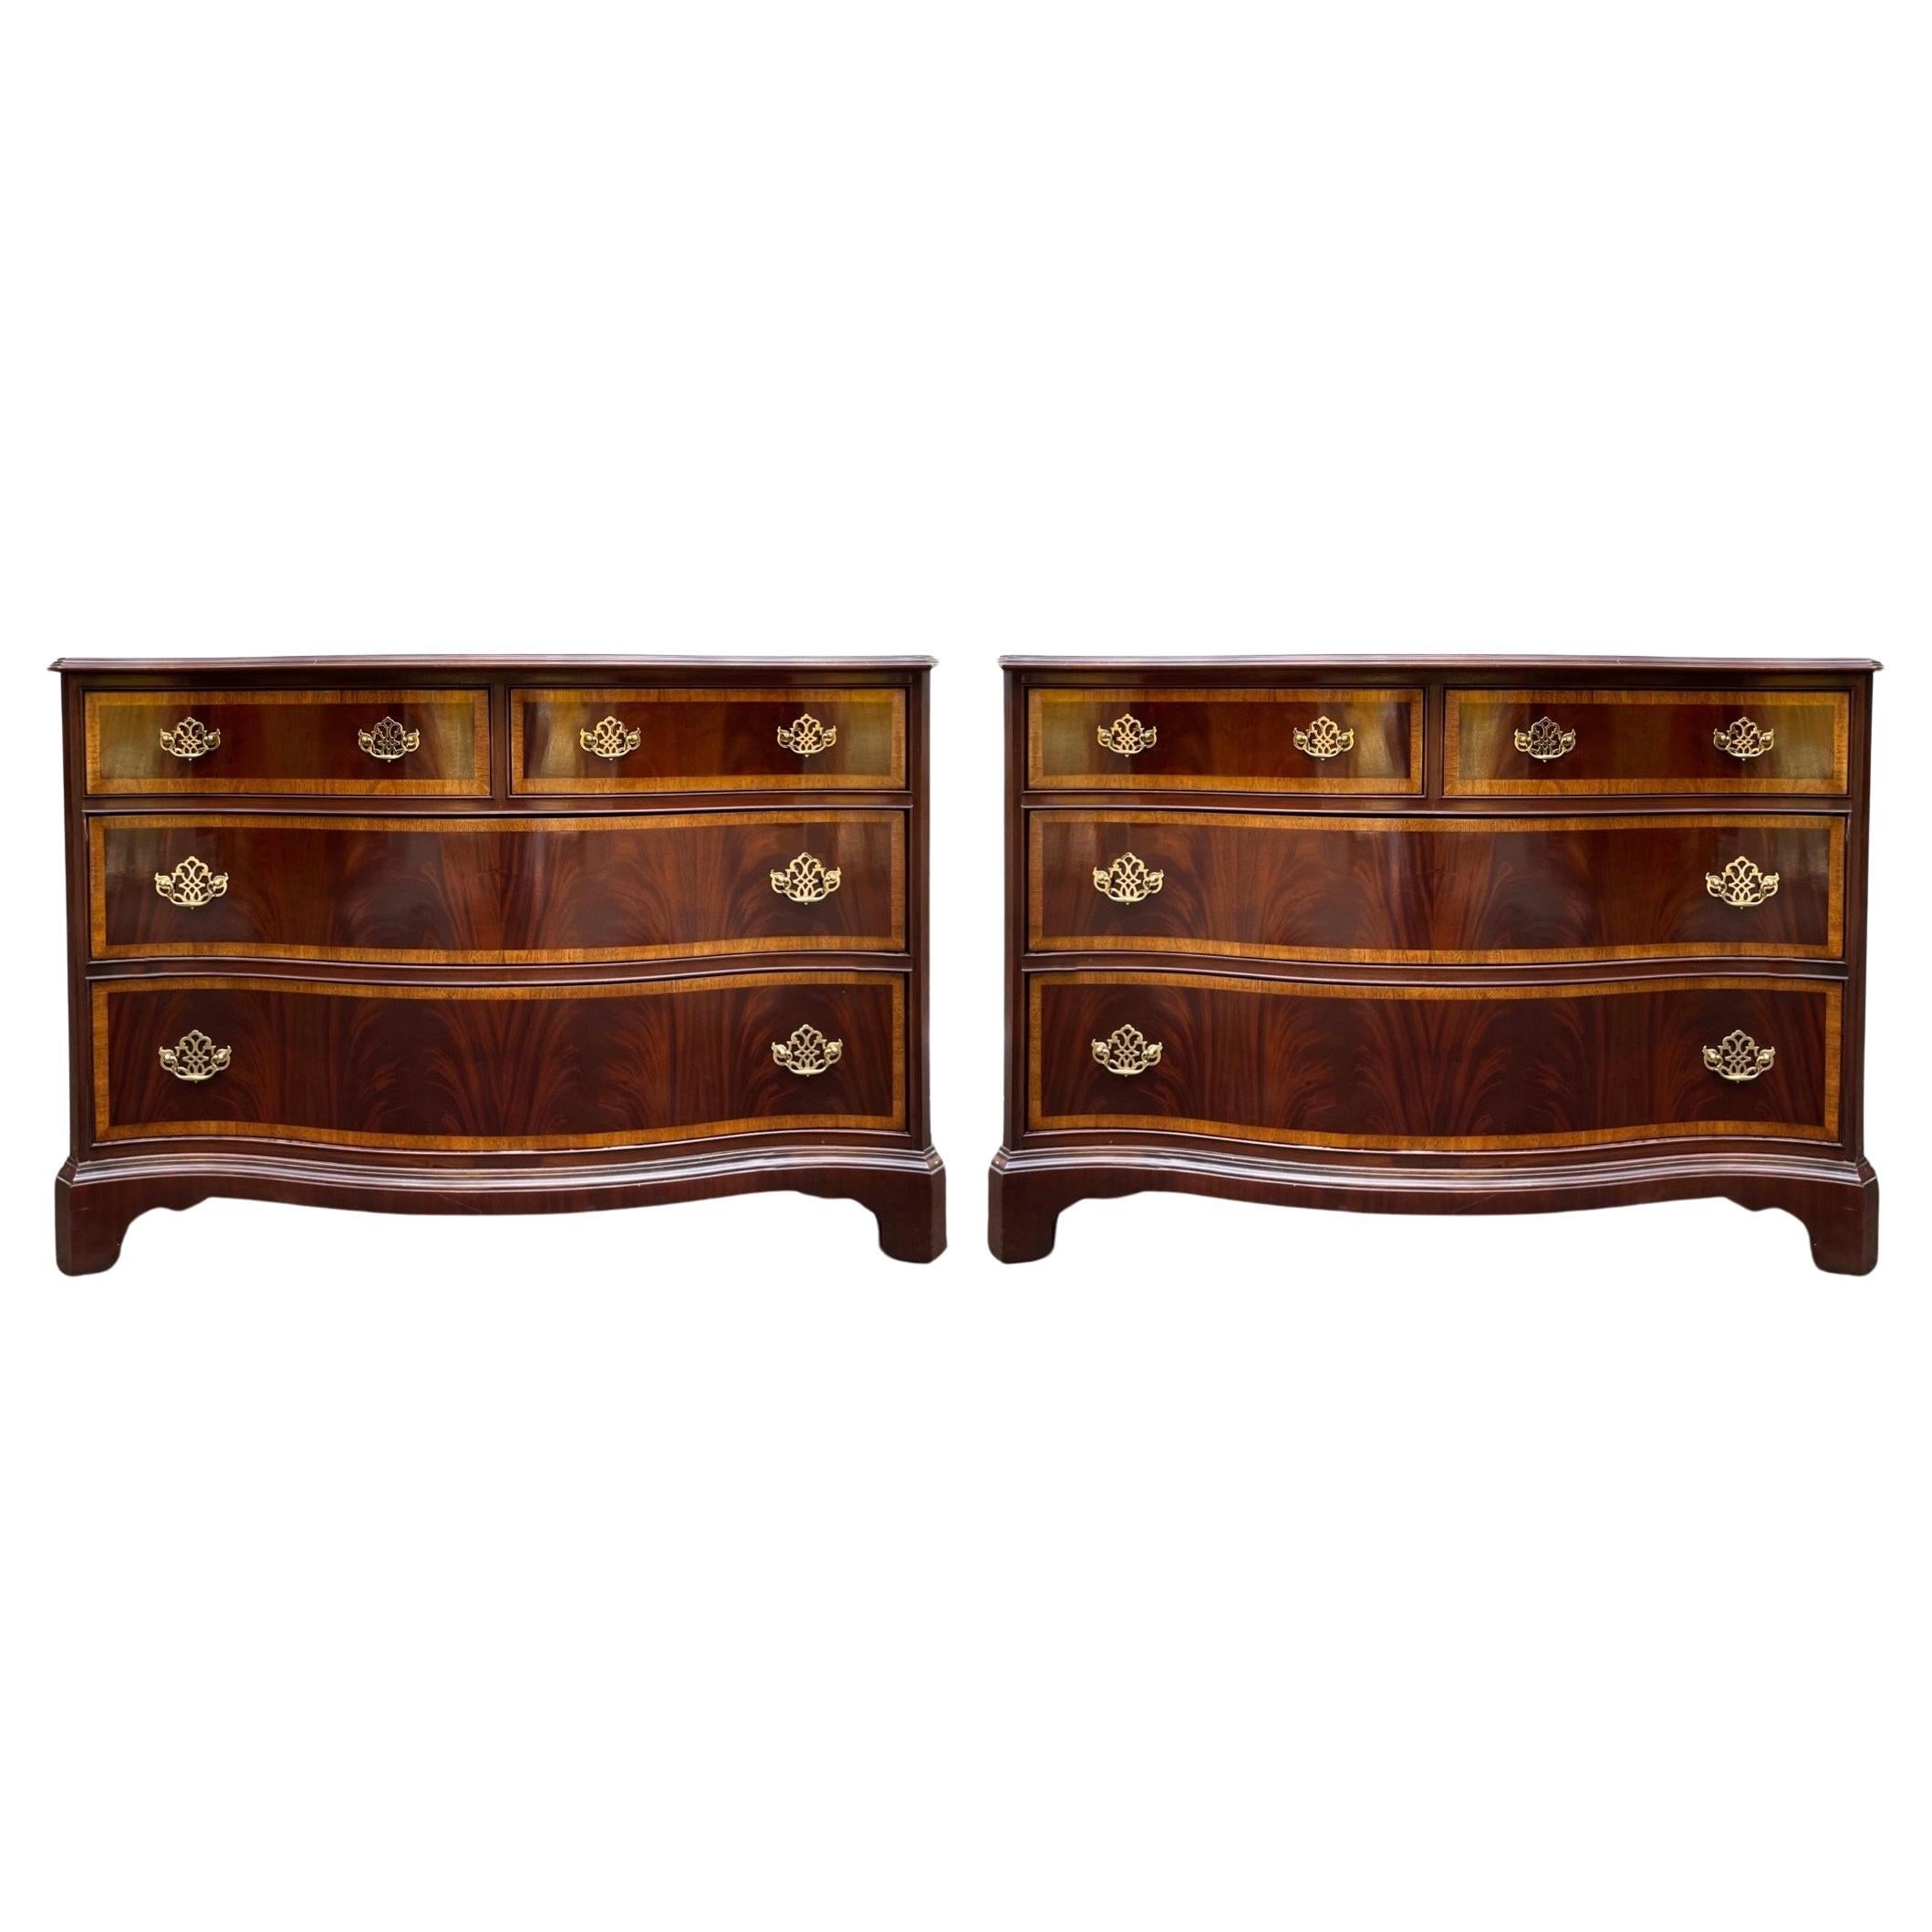 Hickory Furniture Chippendale Style Flame Mahogany Serpentine Chest - Pair For Sale